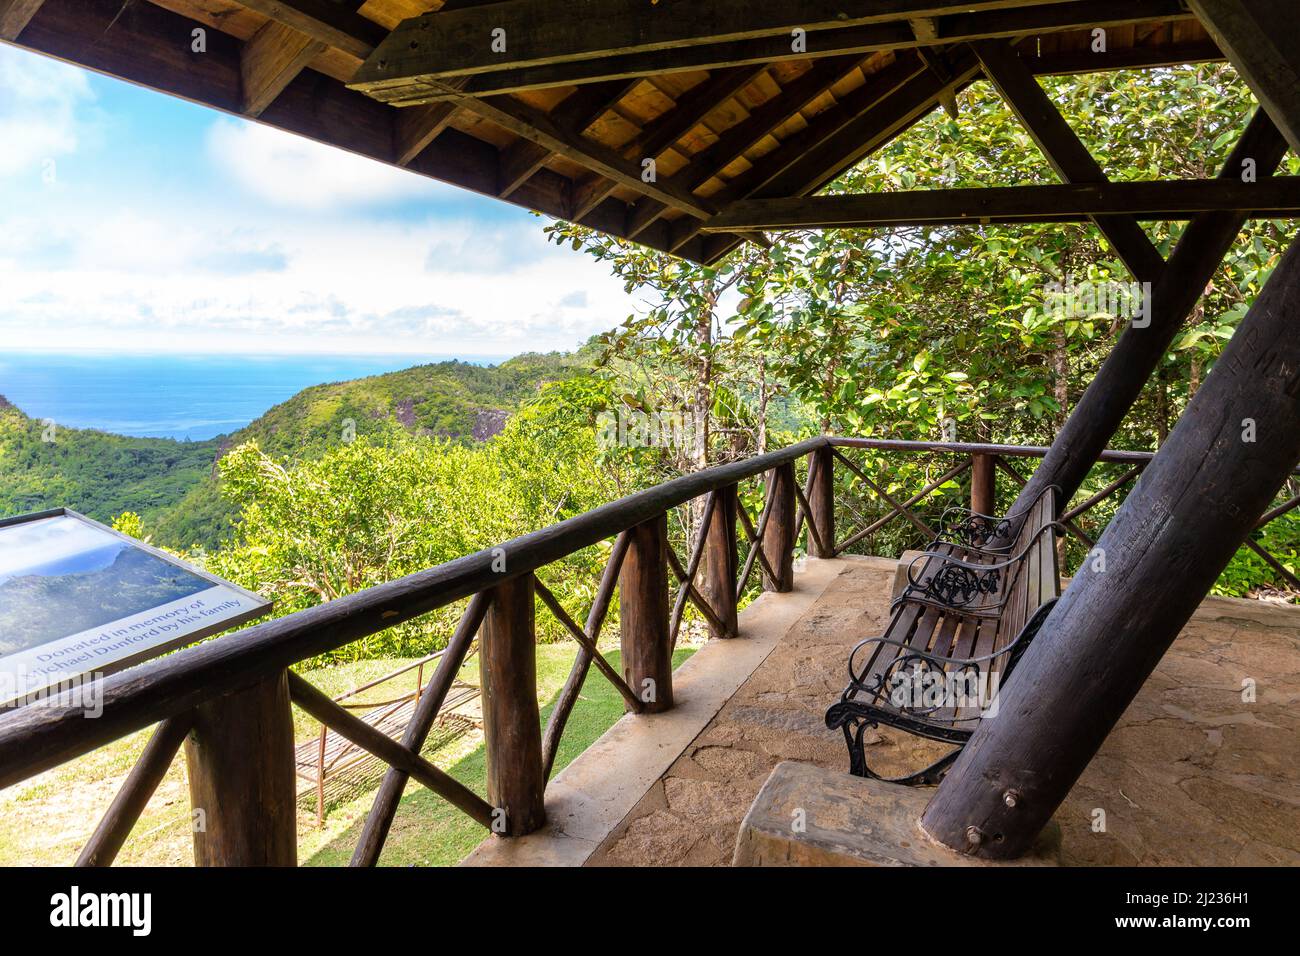 Mahe, Seychelles, 3.05.2021. Venn's Town - Mission Lodge wooden viewing platform with benches and panoramic map overlooking lush tropical forest. Stock Photo